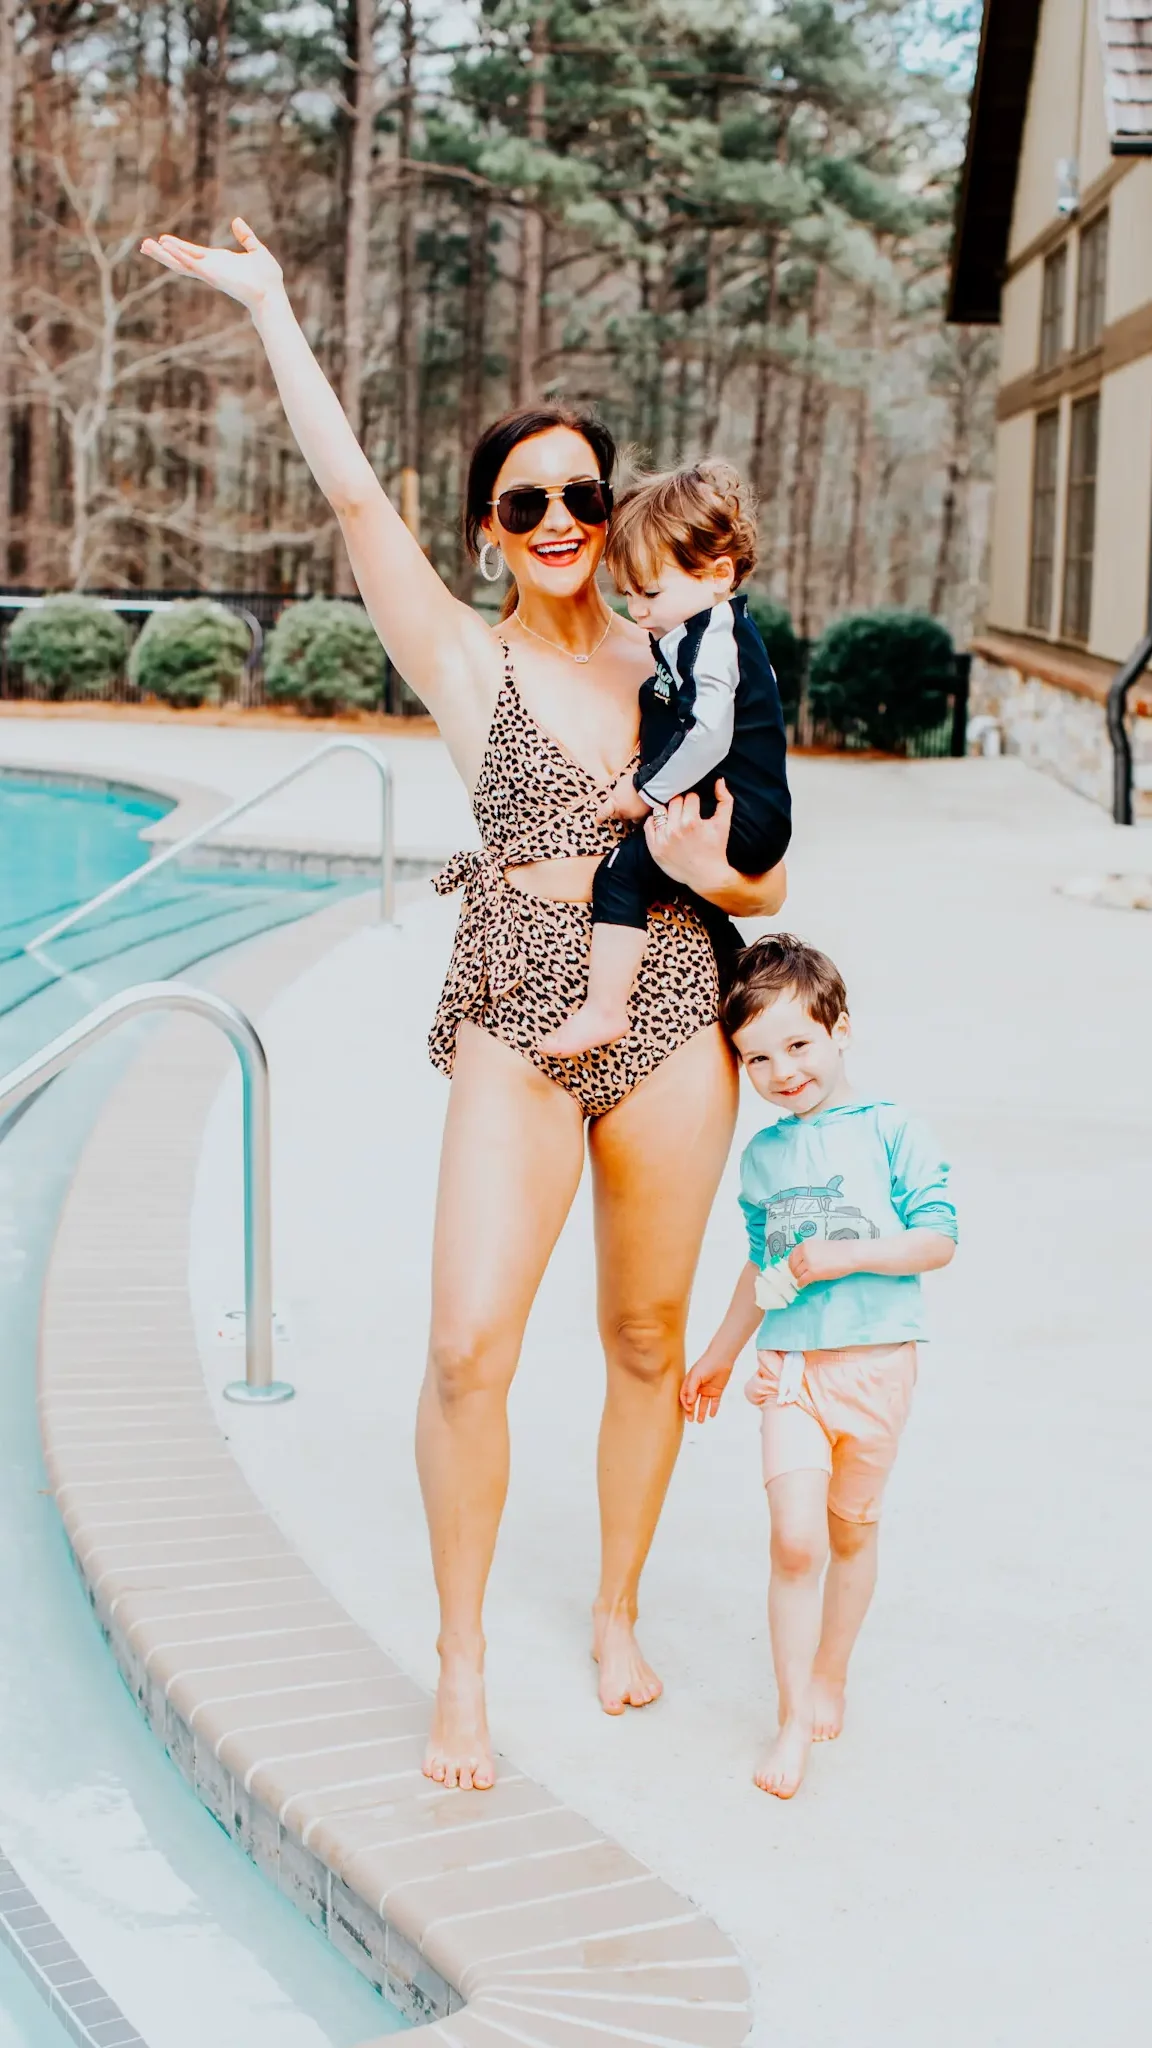 Mom Swimsuits from Dick's Sporting Goods by Alabama Mom + Fashion Blogger, Heather Brown // My Life Well Loved